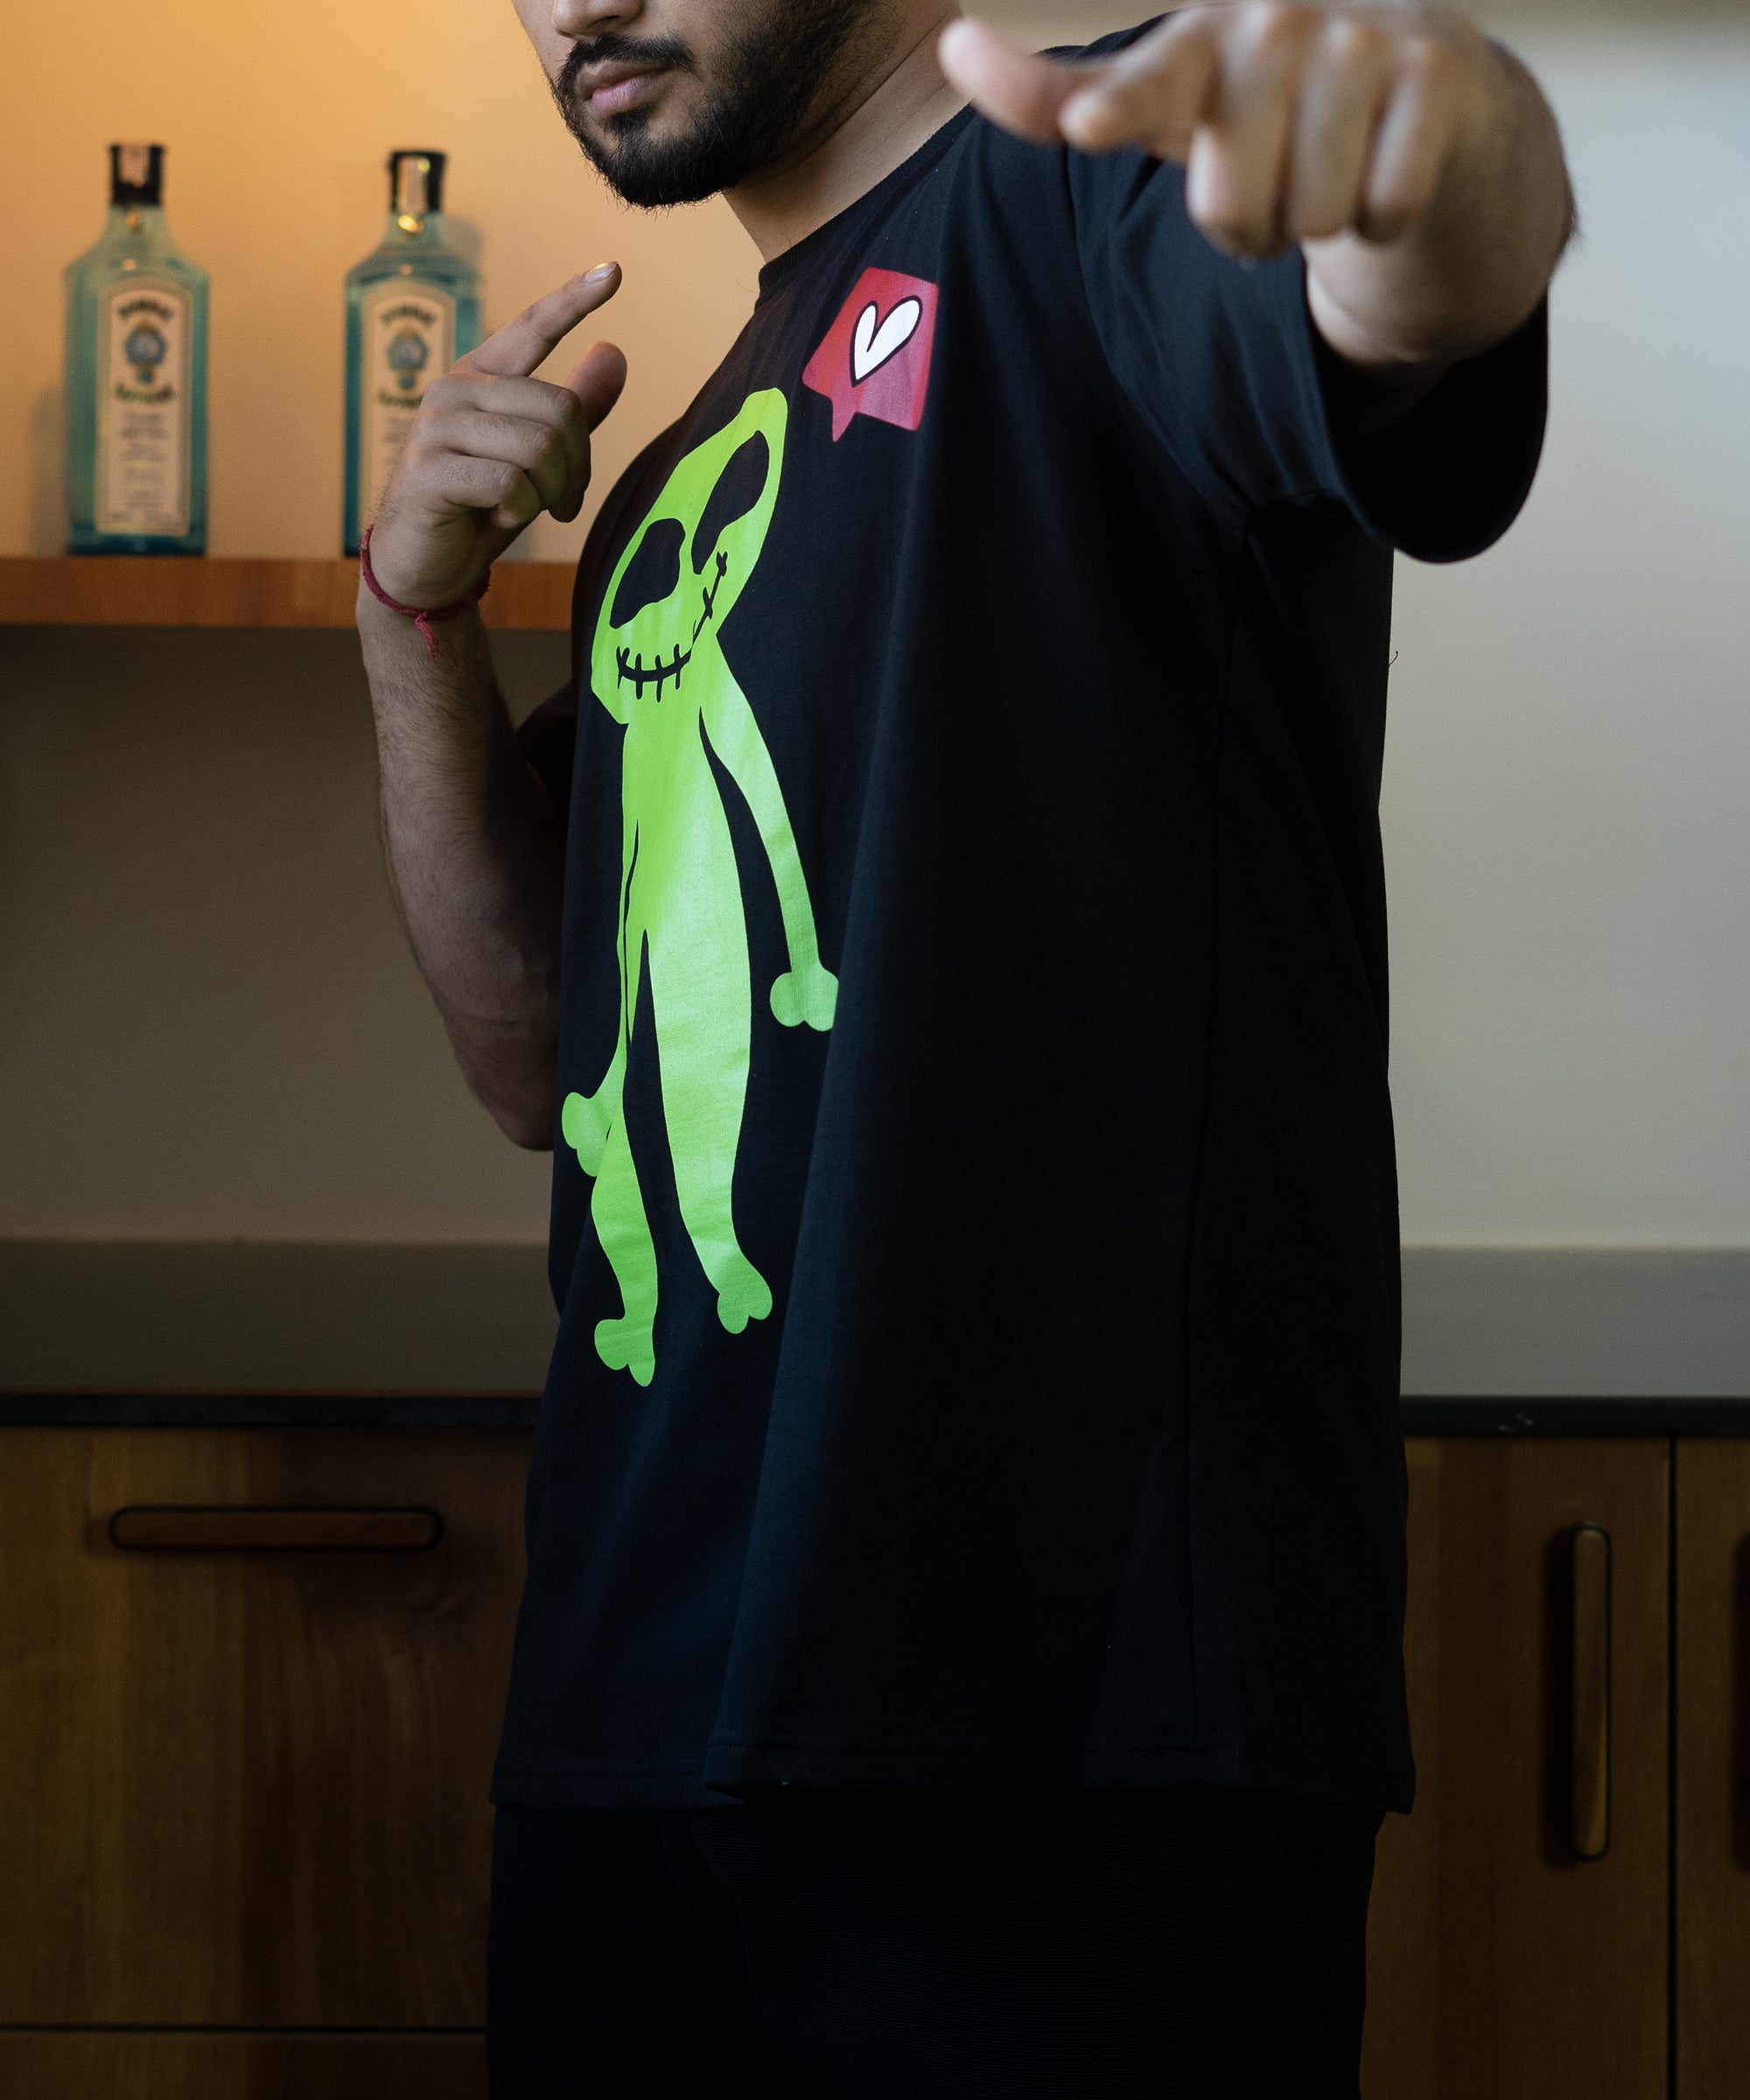 Green Alien Oversized T-shirt - Limited Edition